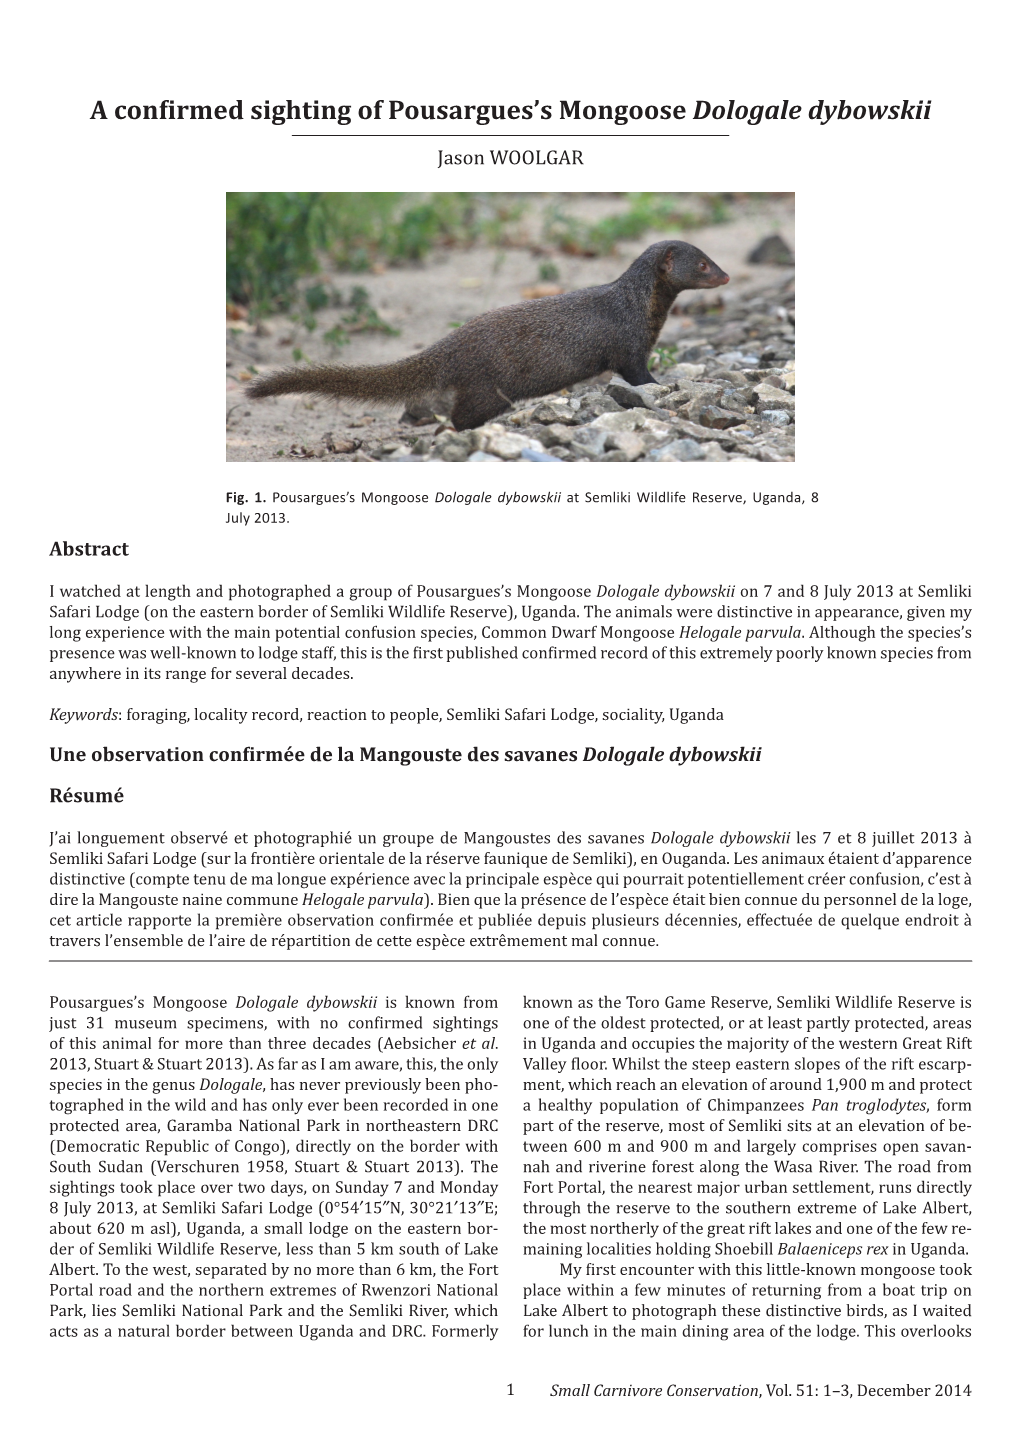 A Confirmed Sighting of Pousargues's Mongoose Dologale Dybowskii